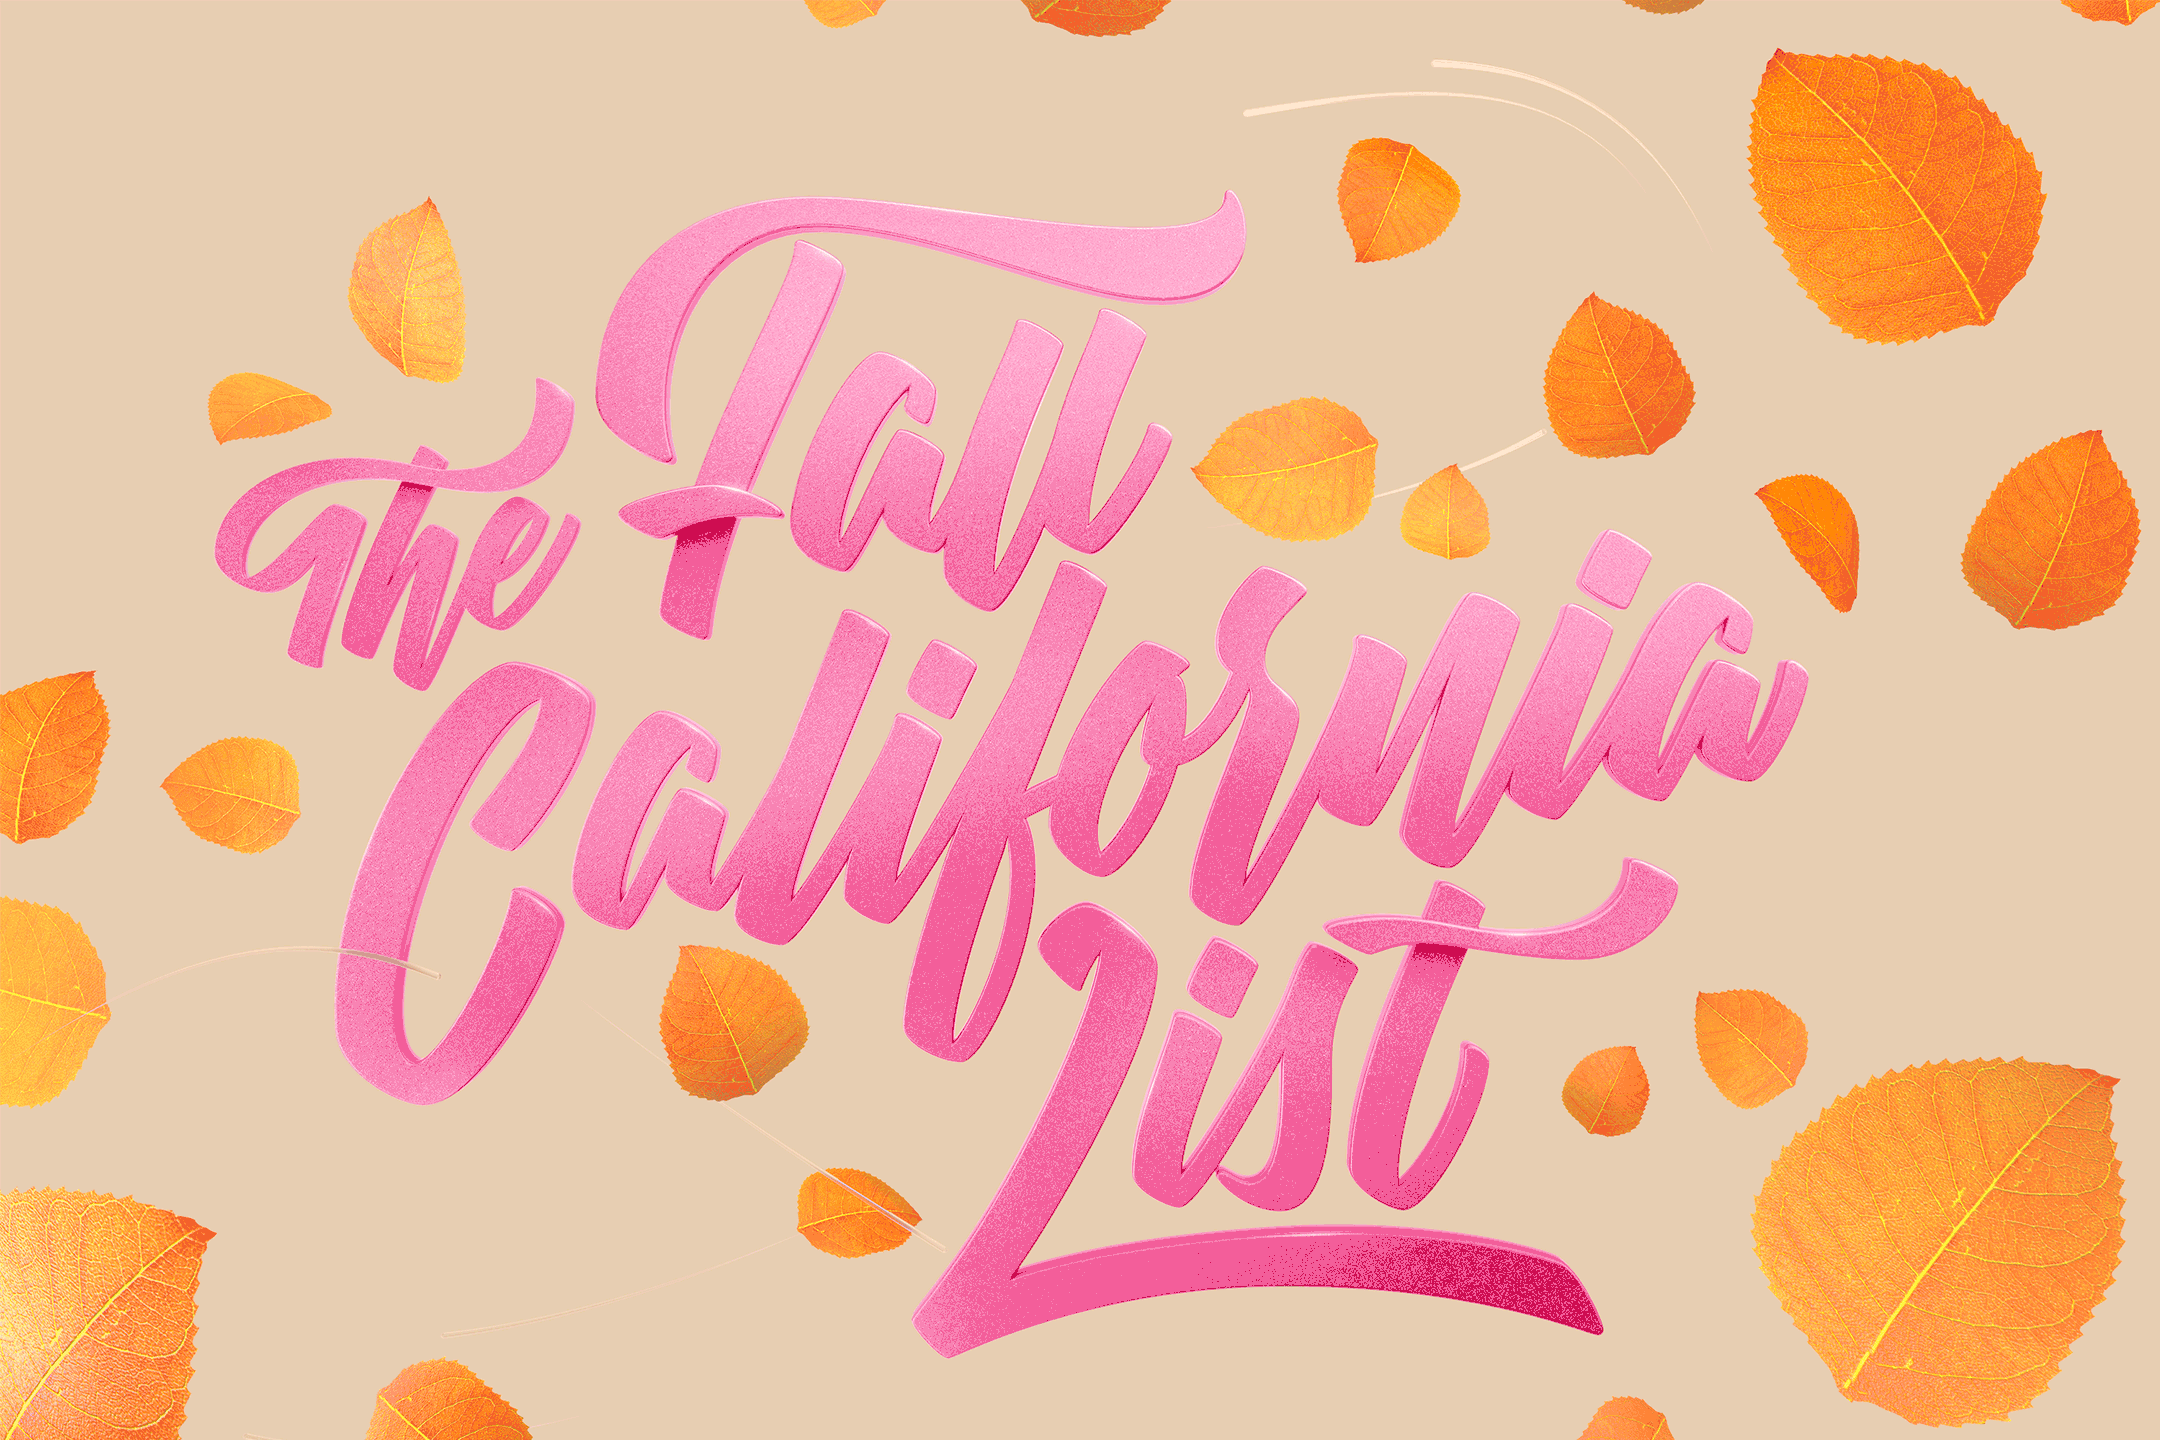 The Fall California List lettering illustration with animation of fall leaves